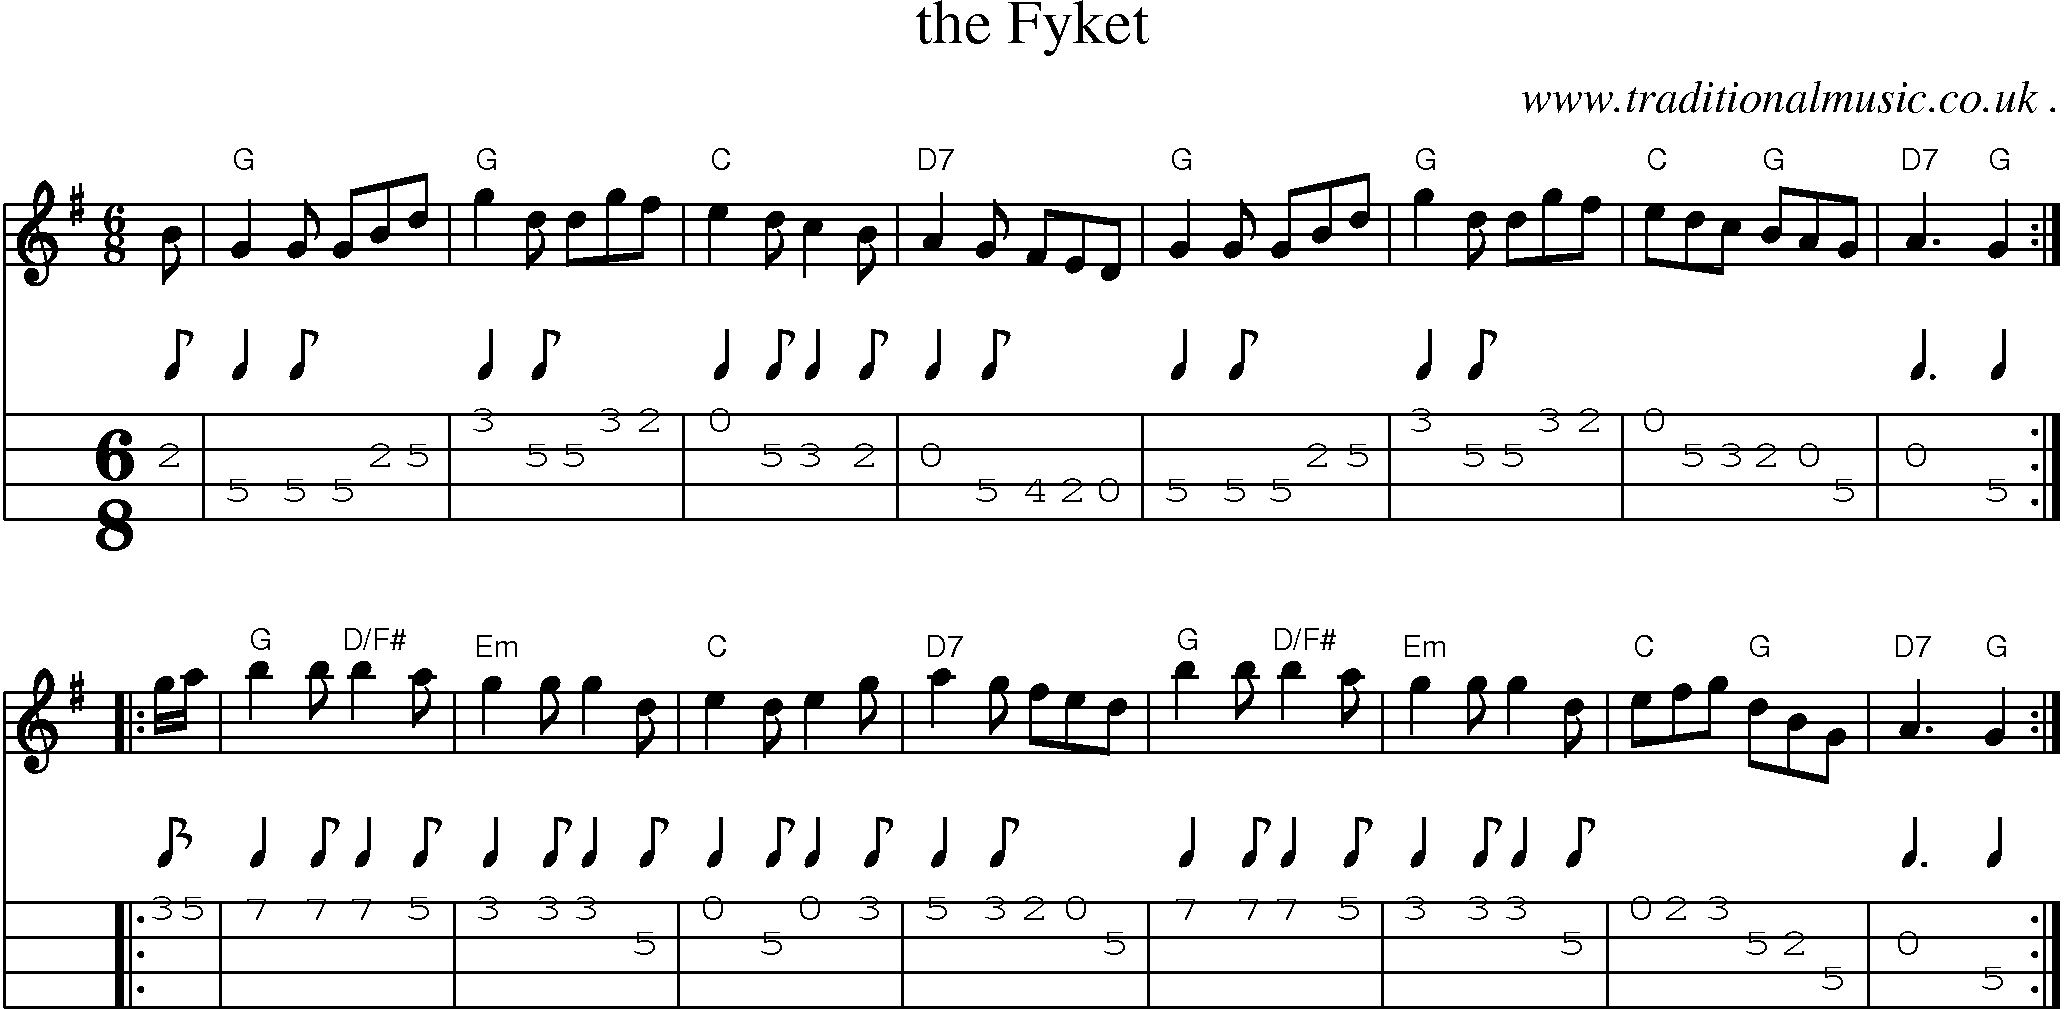 Sheet-music  score, Chords and Mandolin Tabs for The Fyket